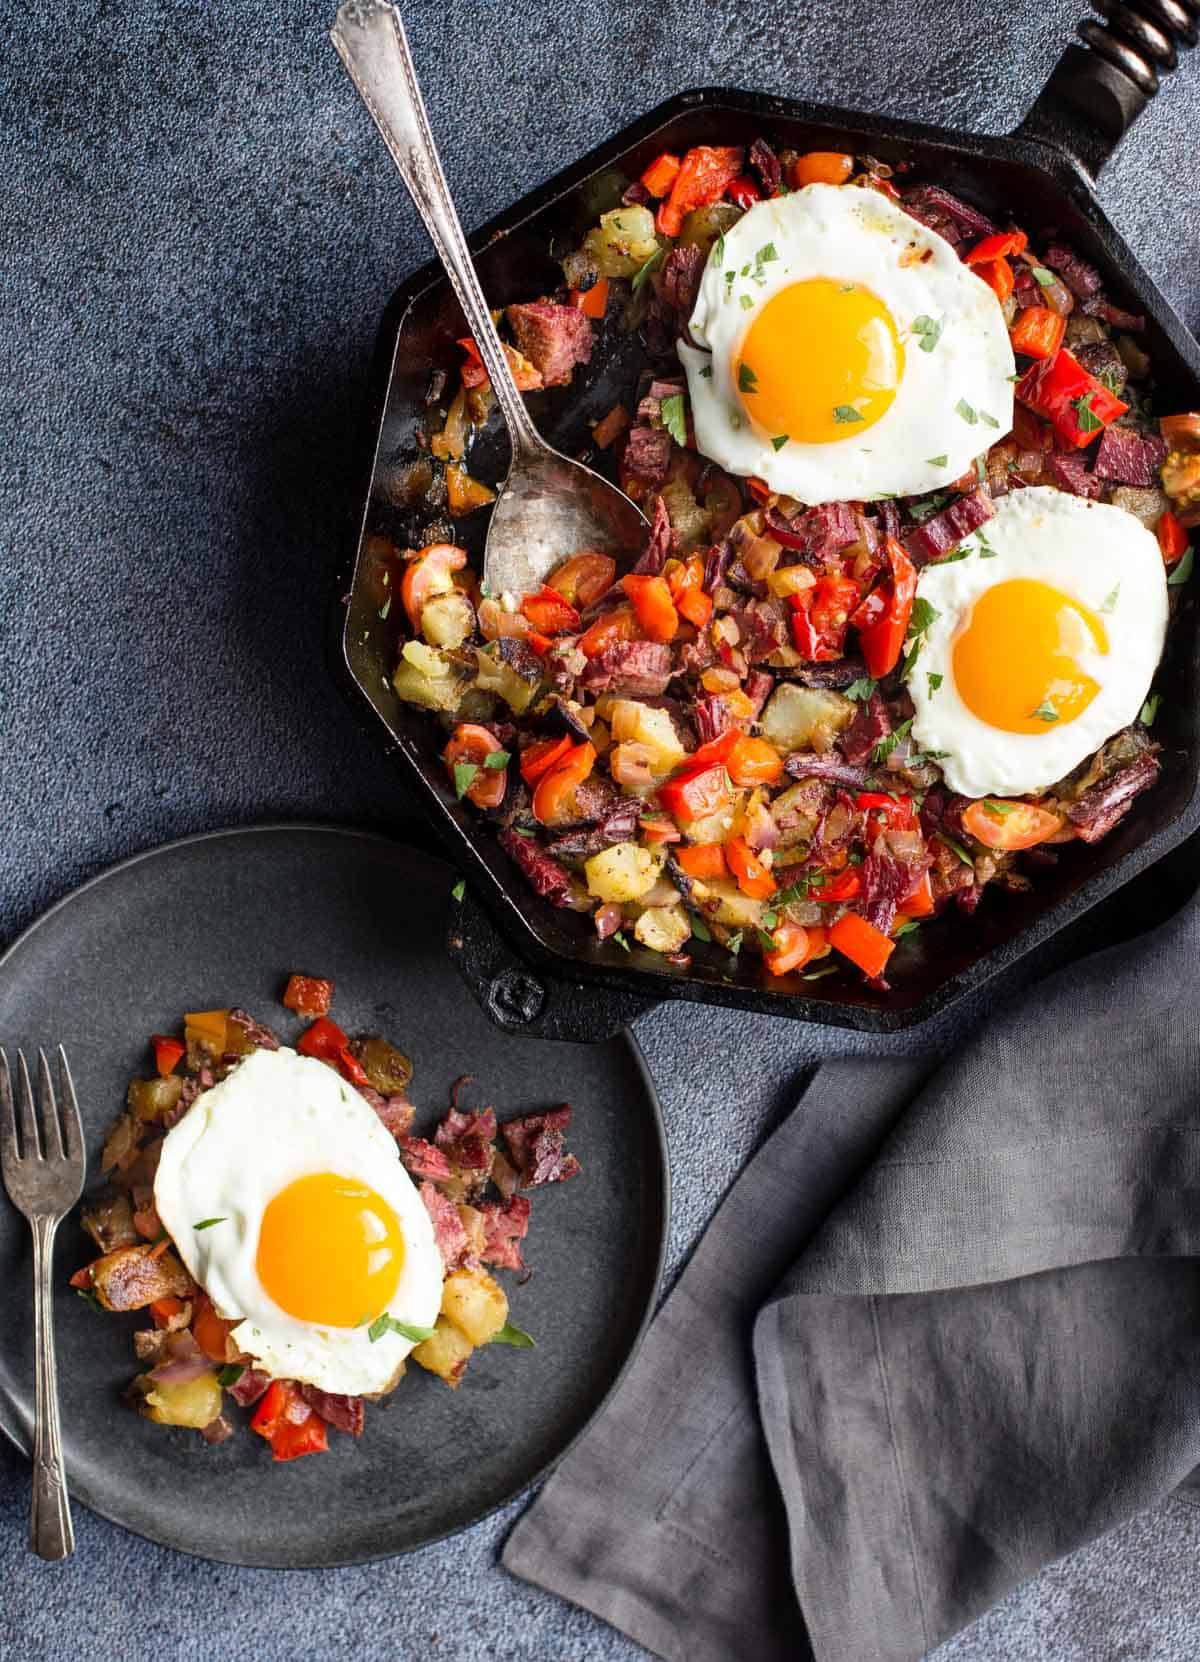 Eggs Sunnyside up over corned beef hash on a plate and cast iron skillet.